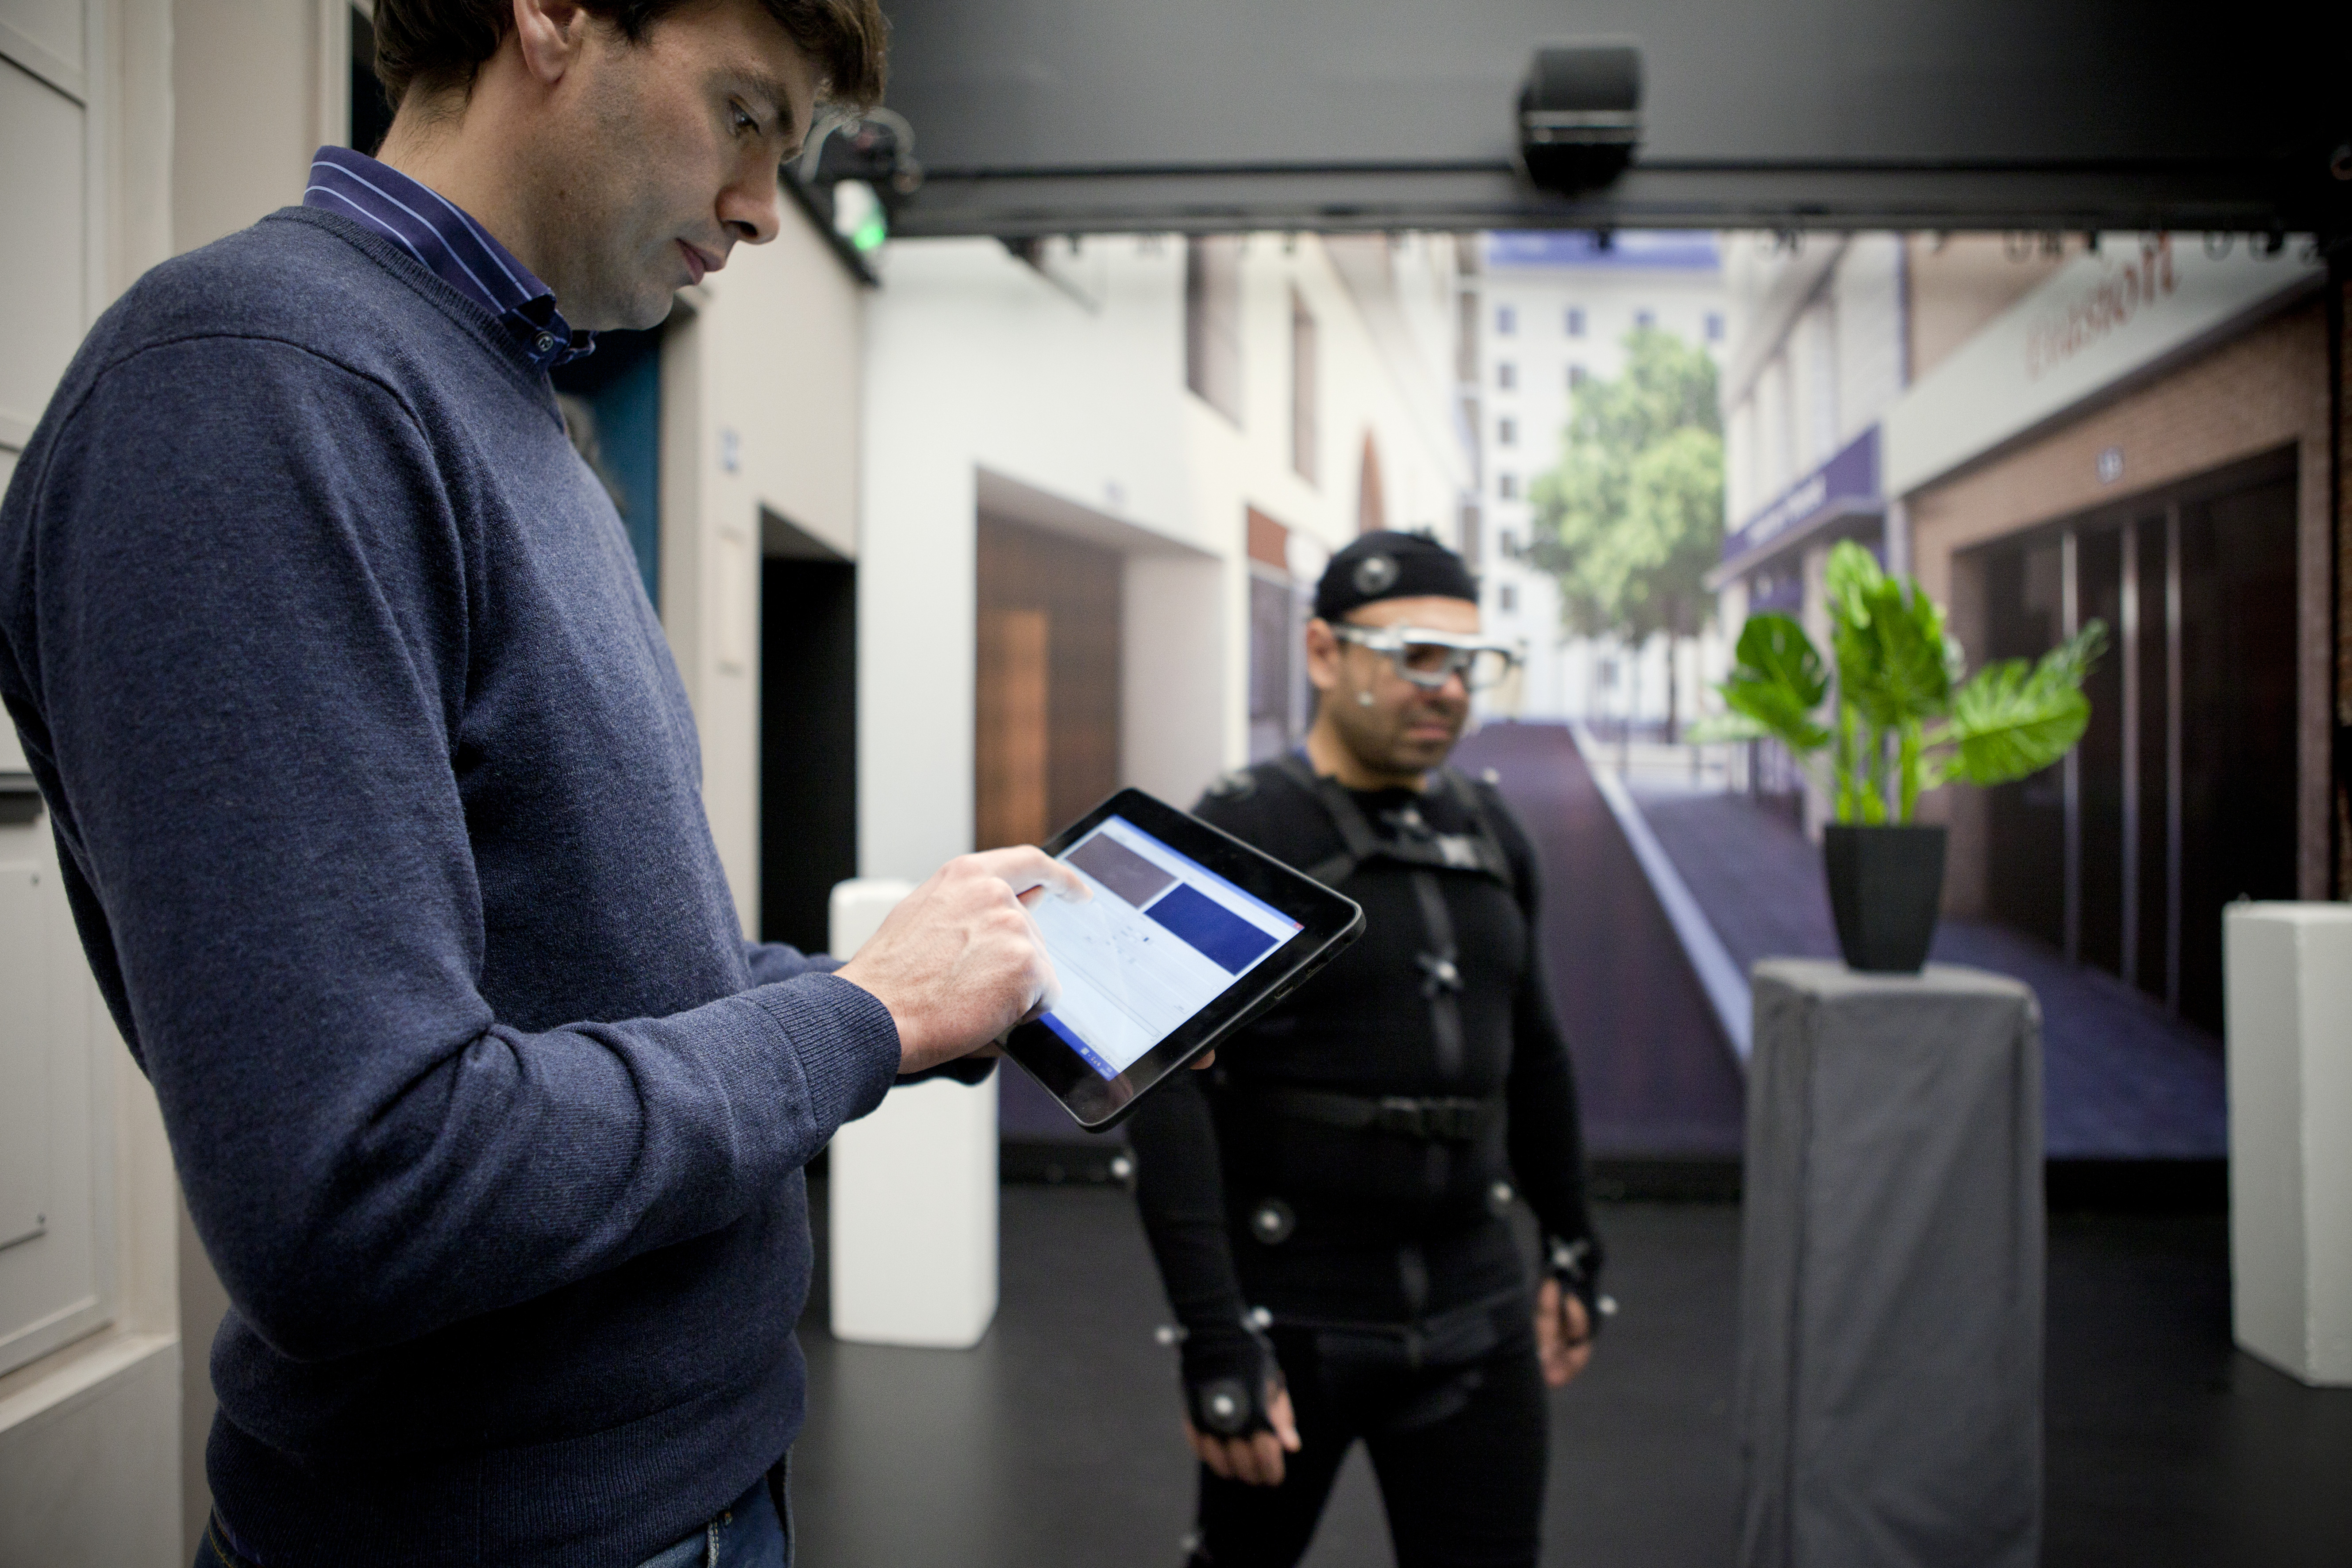 Researcher uses virtual reality (Streetlab) to test a patient’s vision © Serge Picaud, 2019